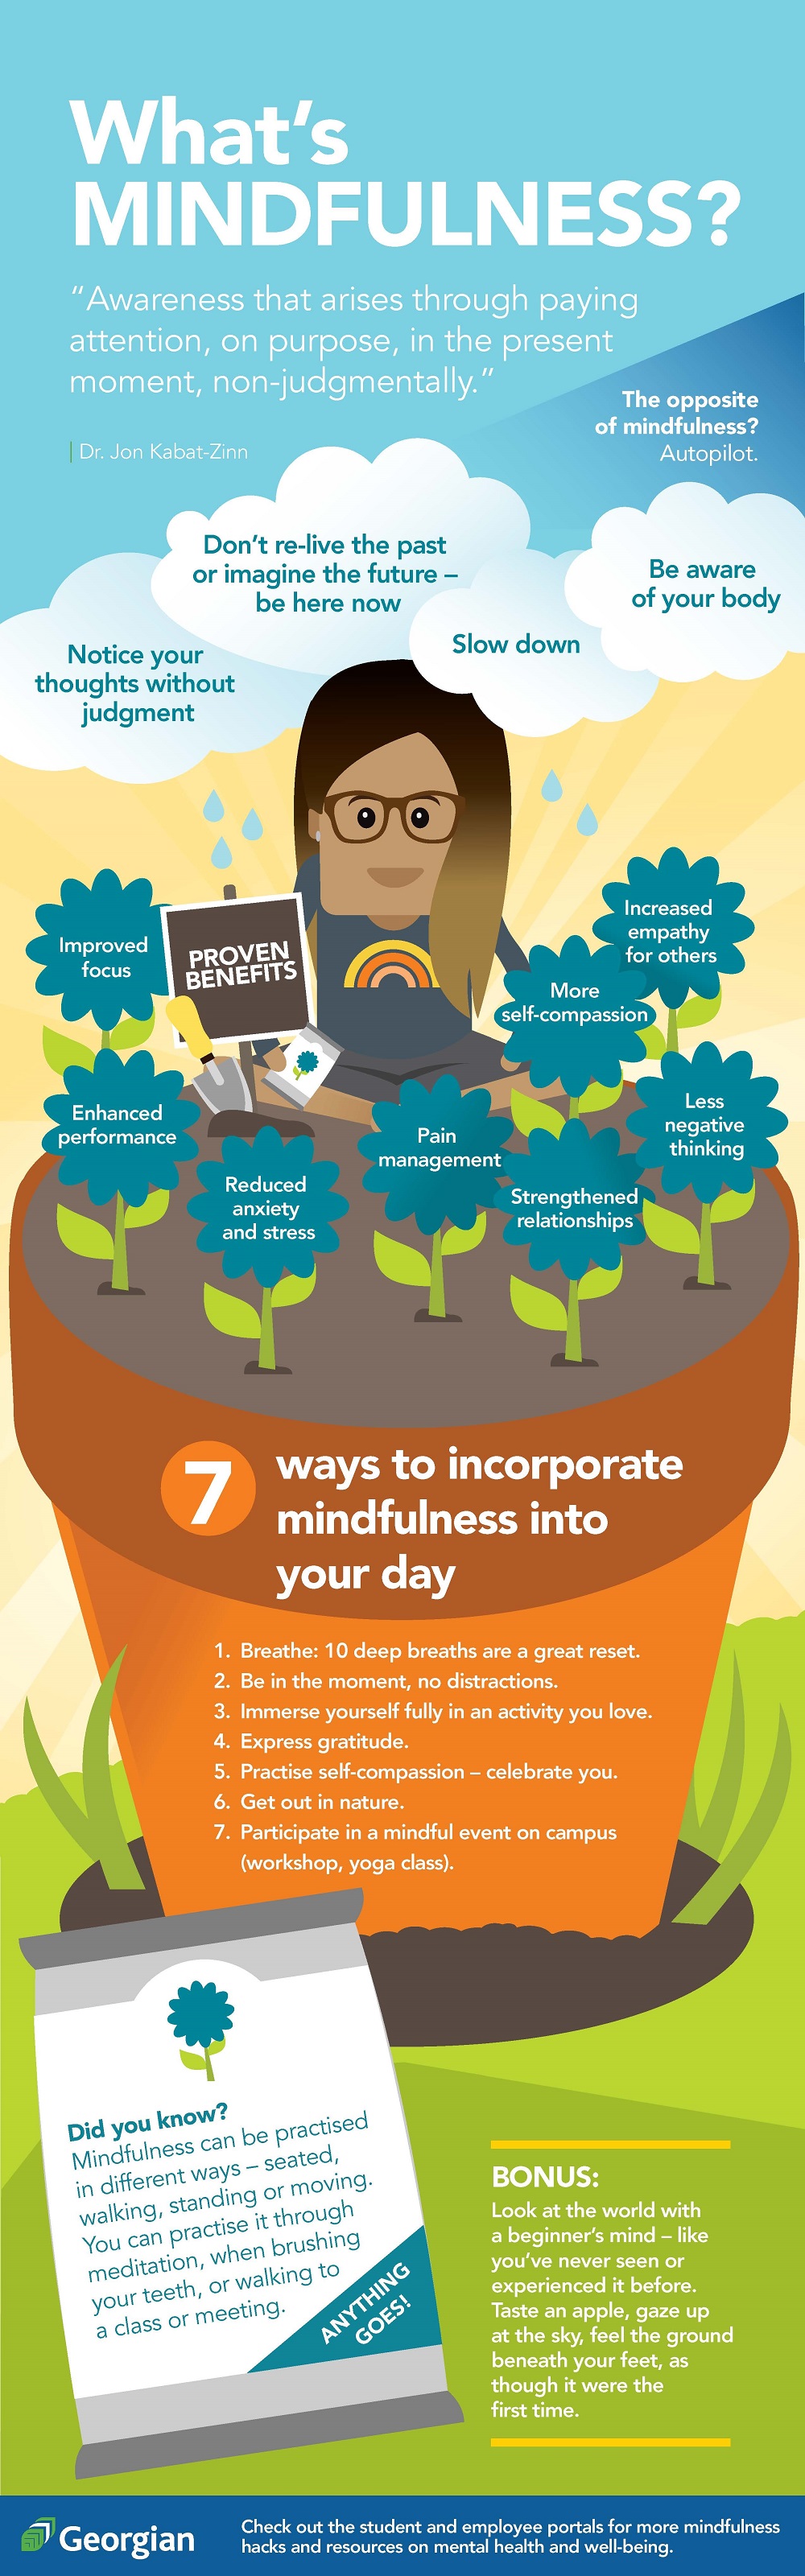 infographic on mindfulness; see as .pdf